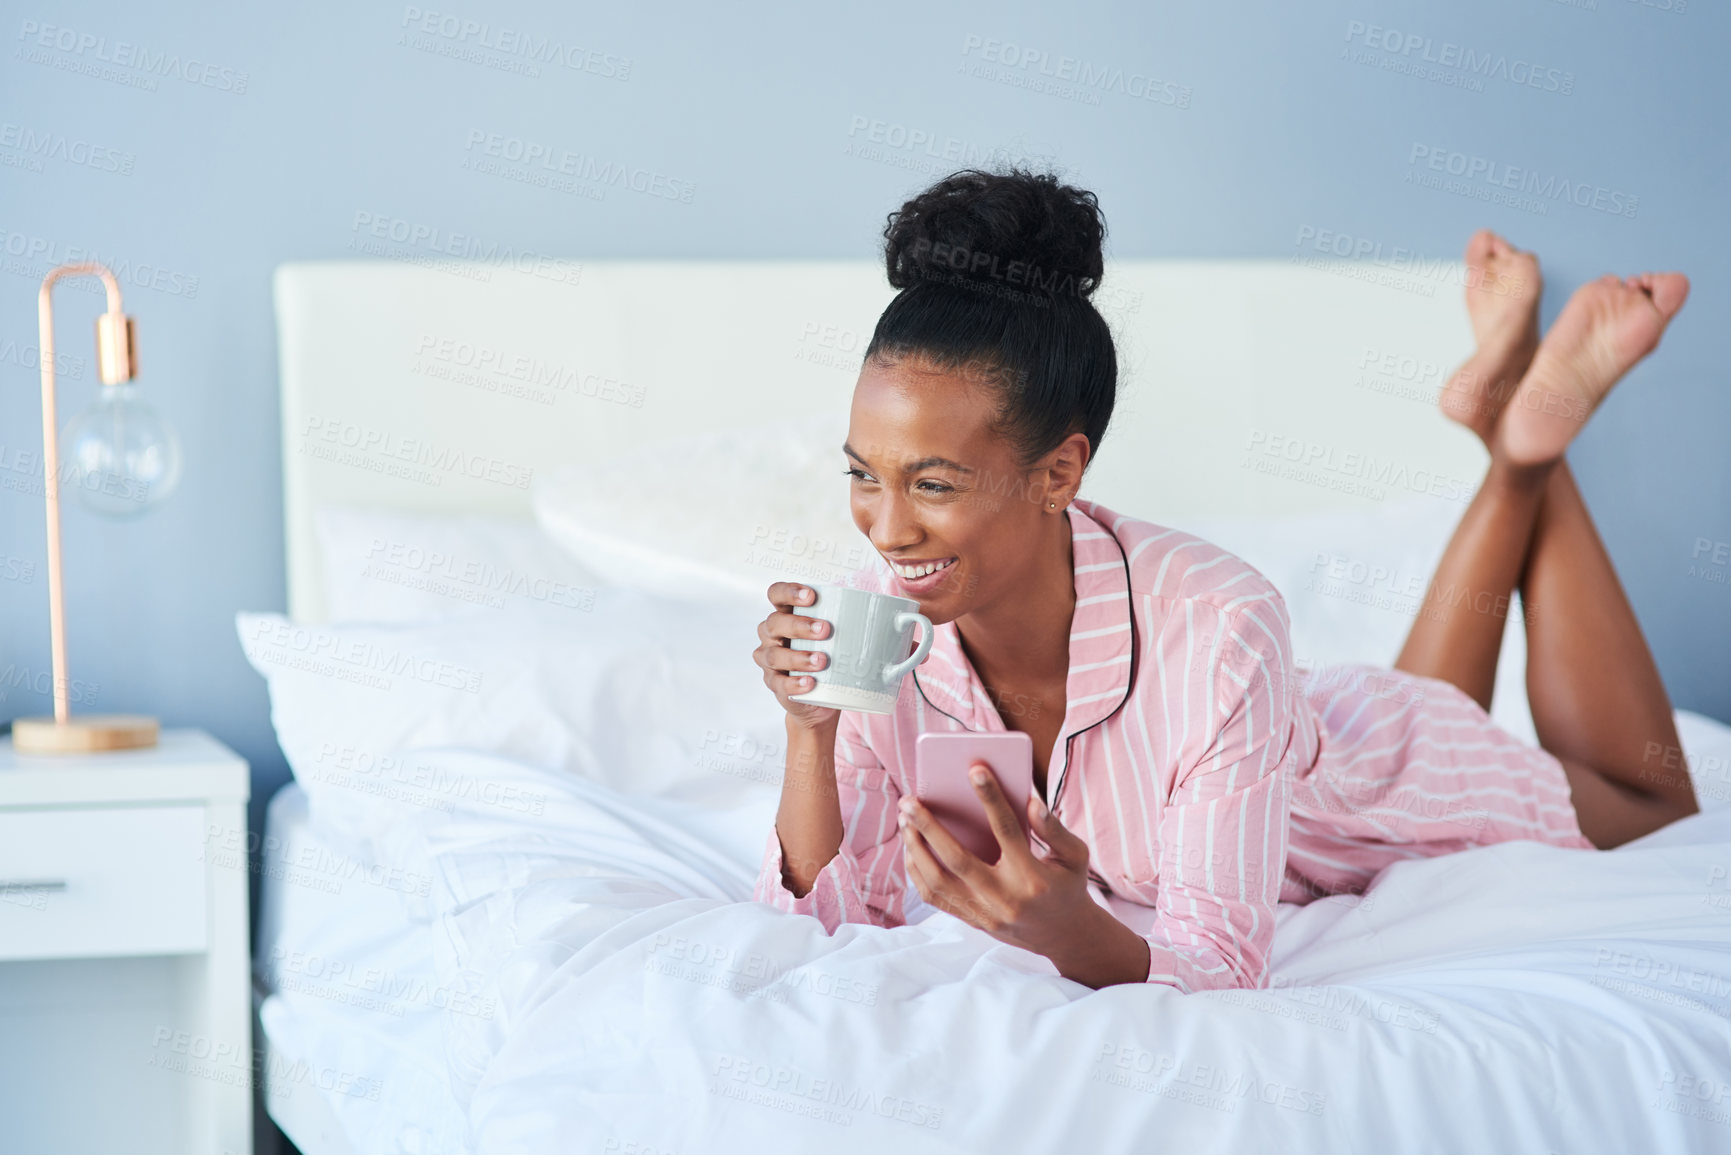 Buy stock photo Shot of an attractive young woman drinking coffee while using her cellphone in bed at home